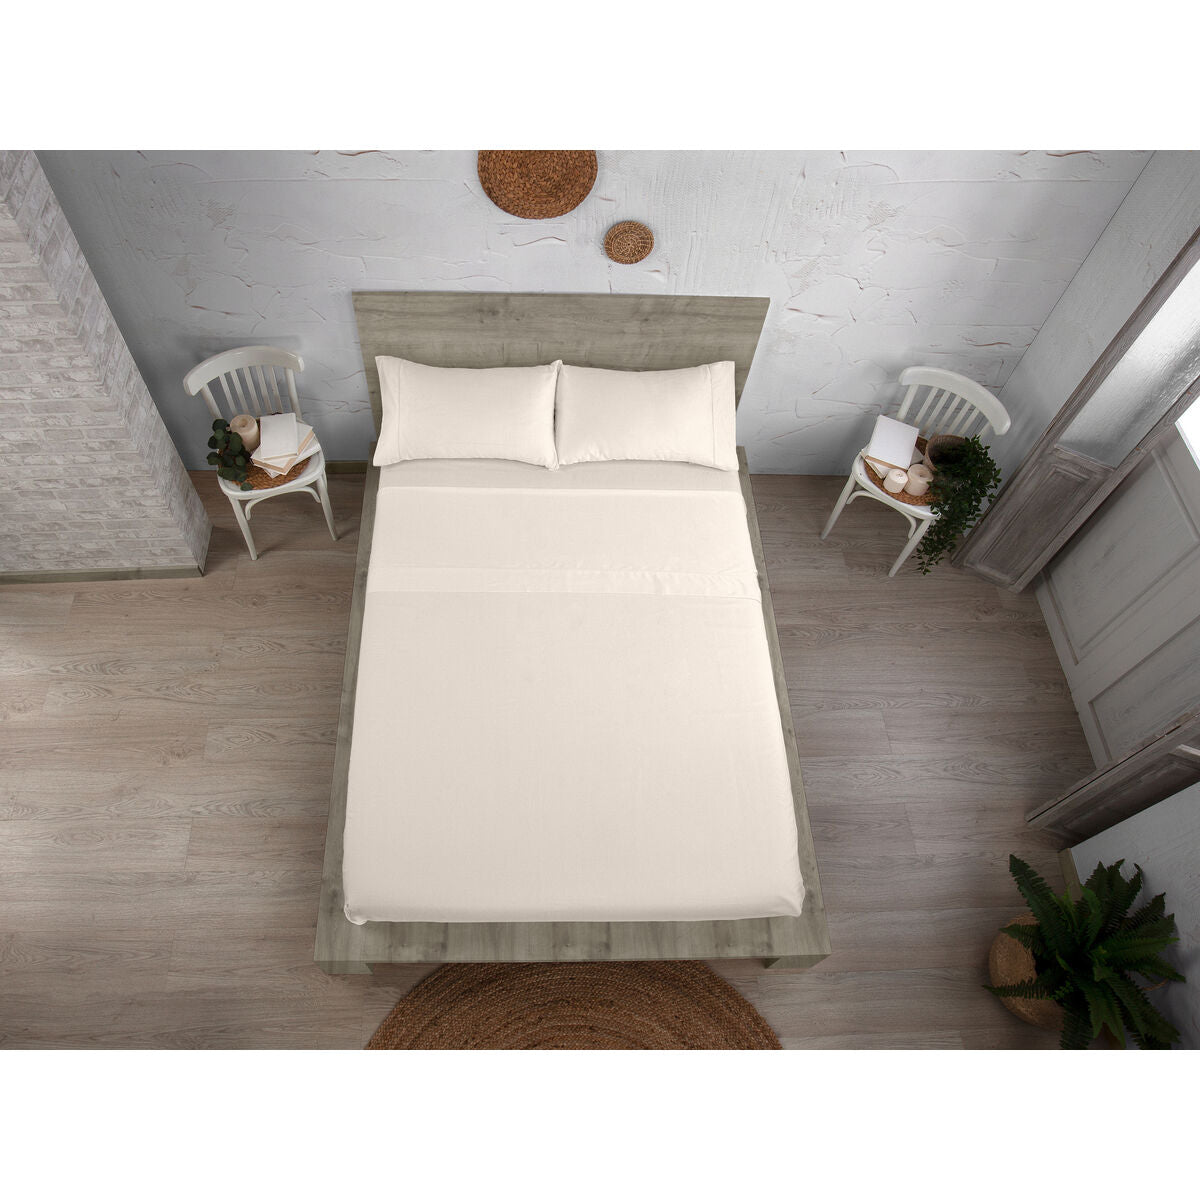 Alexandra House Living Natural storth Letto 1 personale 3 -camera